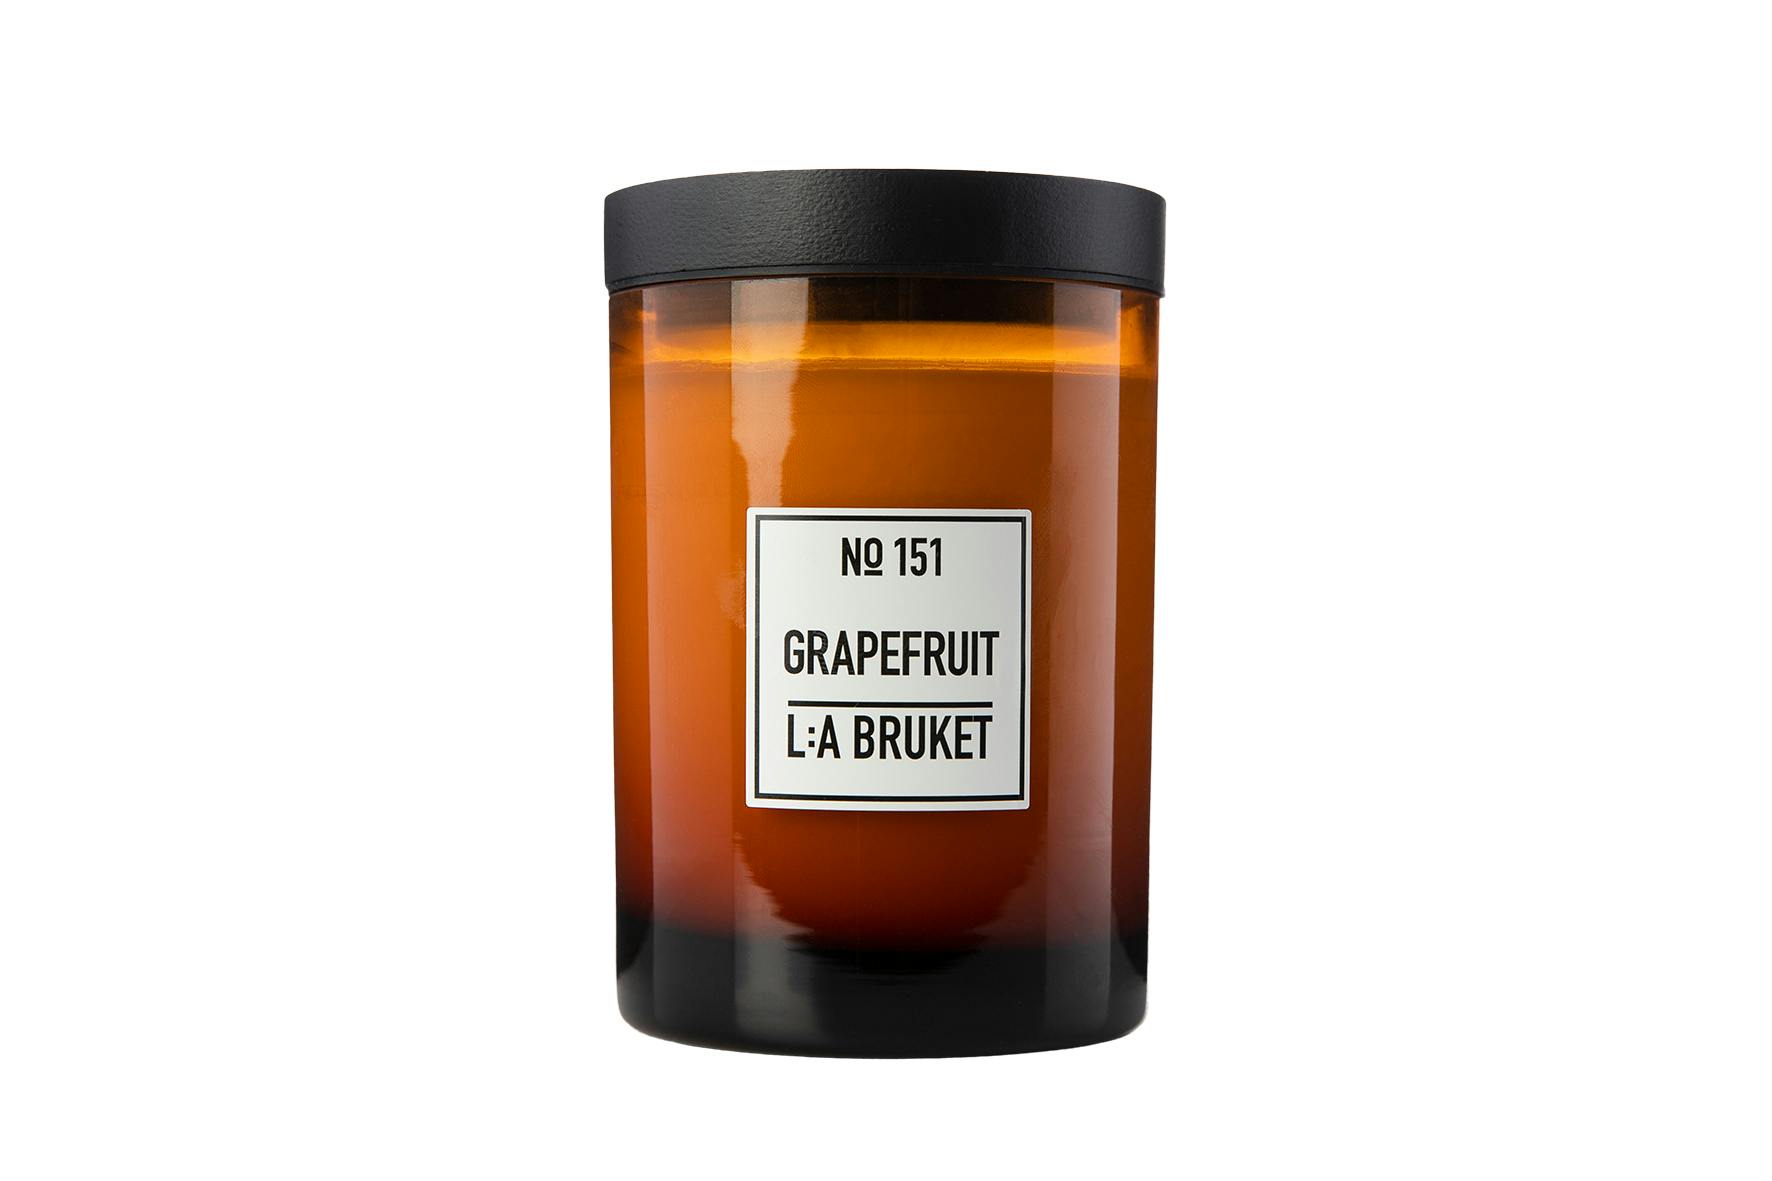 L:A Bruket candle, Swedish gifts. vegan candle, grapefruit, natural candles, organic, Nordic style